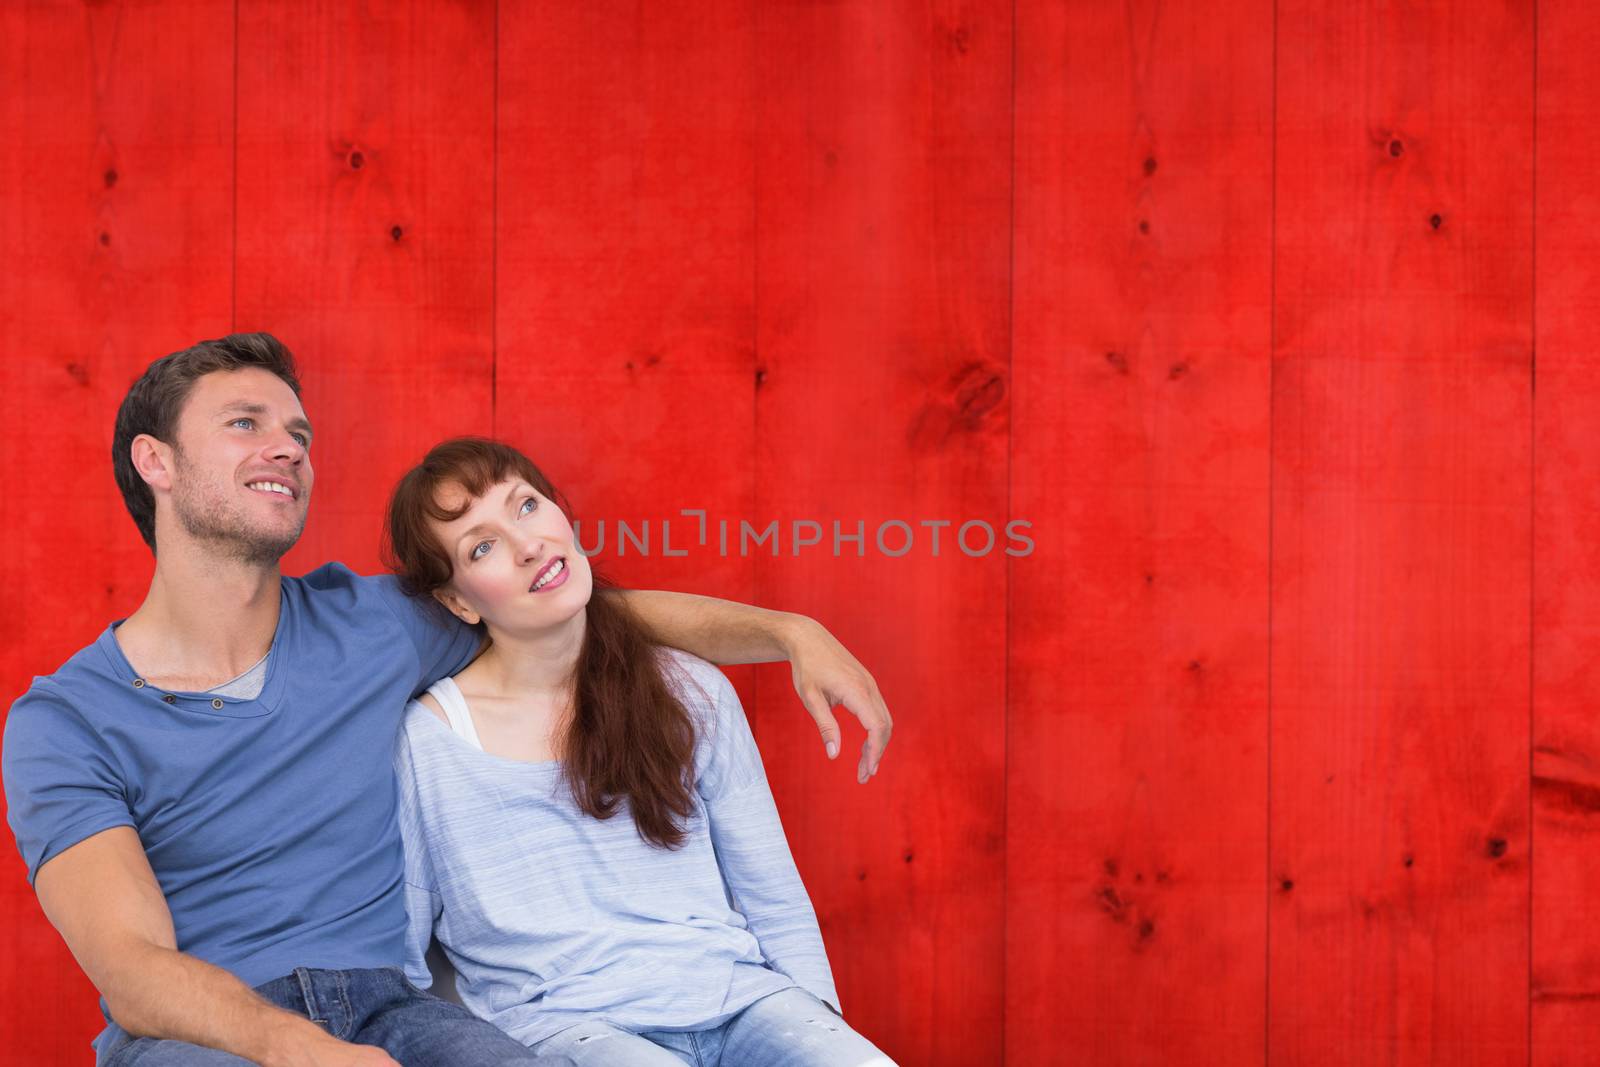 Couple sitting on floor together against bright red wooden planks